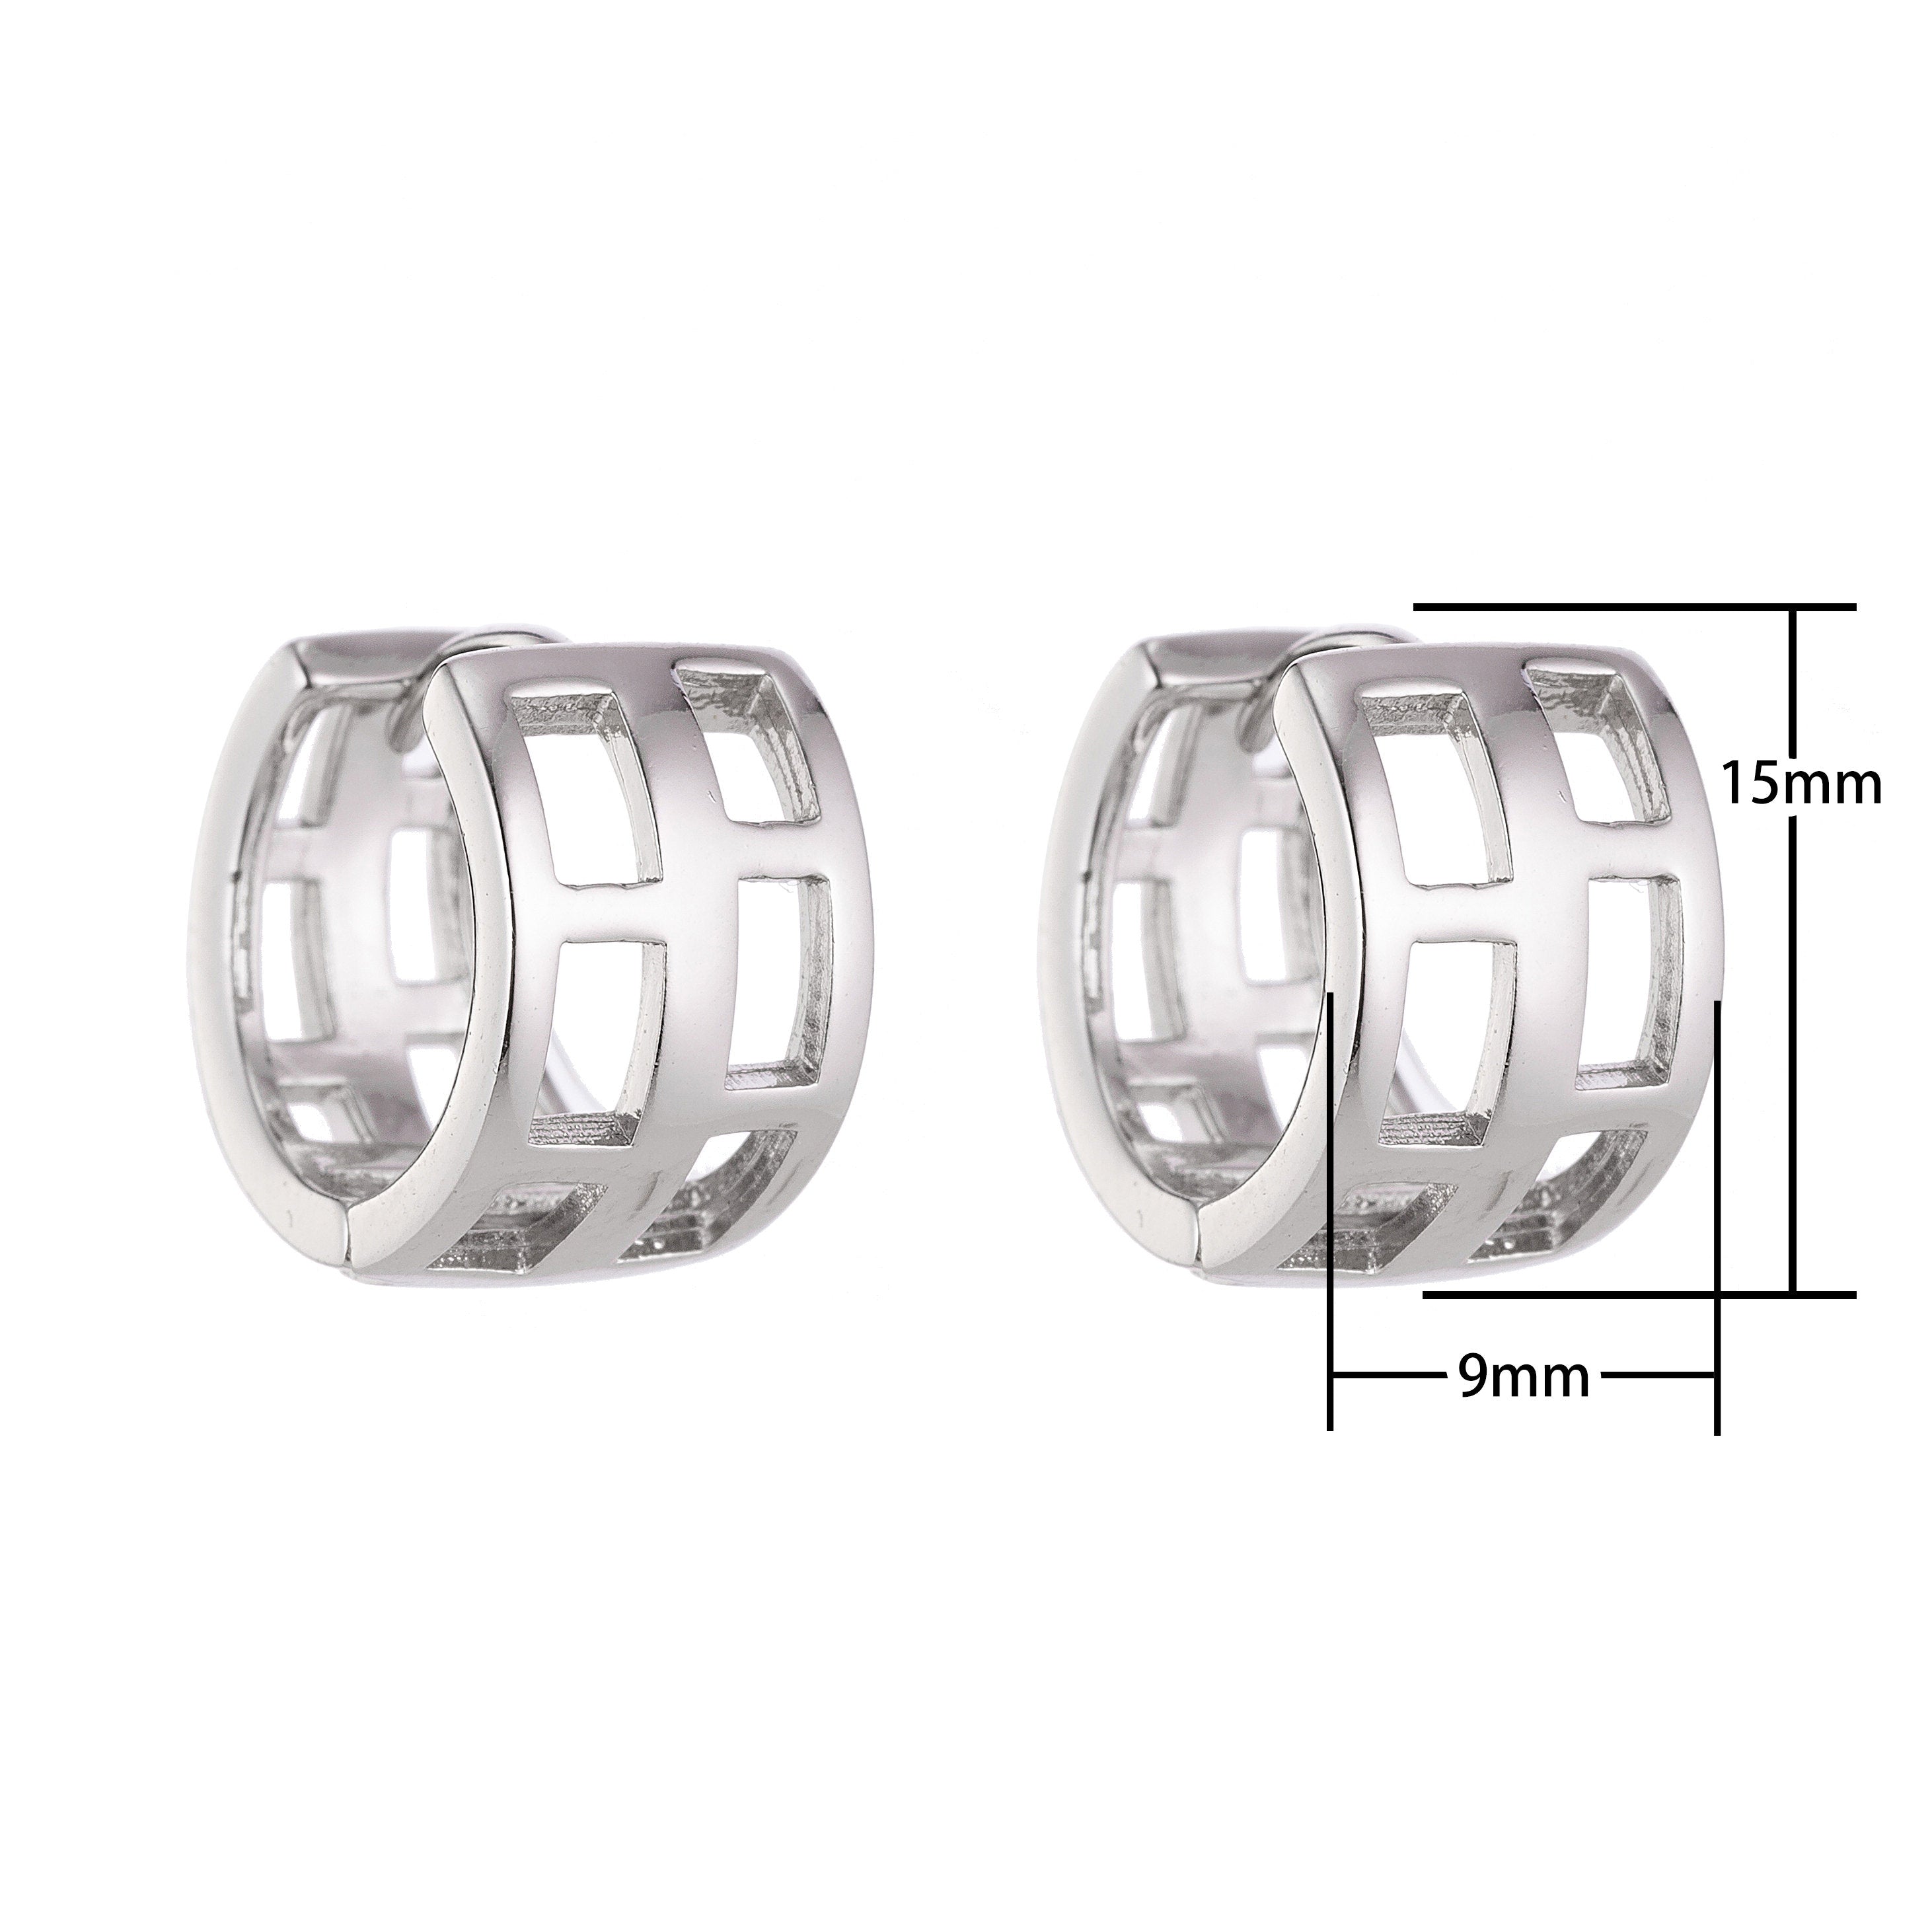 Silver Plated Cage Small Huggies Earrings, Small Hoop Earrings, Silver Jewelry, Lightweight Earrings, Tiny Earrings, Earring-401 - DLUXCA